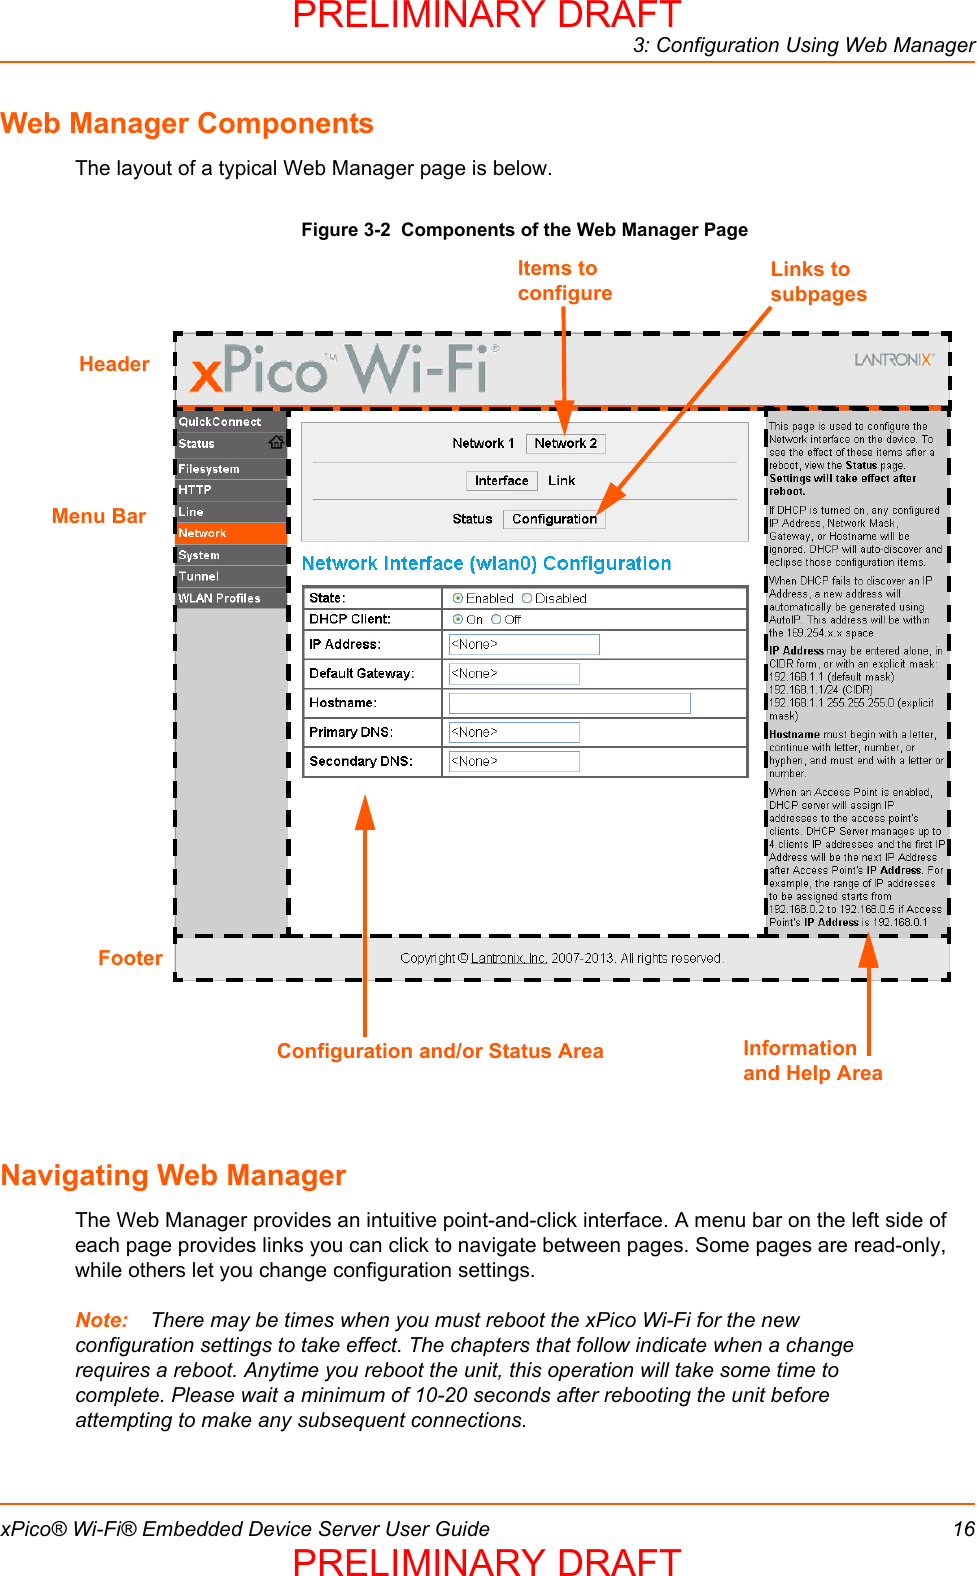 3: Configuration Using Web ManagerxPico® Wi-Fi® Embedded Device Server User Guide 16Web Manager ComponentsThe layout of a typical Web Manager page is below.Figure 3-2  Components of the Web Manager PageNavigating Web ManagerThe Web Manager provides an intuitive point-and-click interface. A menu bar on the left side of each page provides links you can click to navigate between pages. Some pages are read-only, while others let you change configuration settings. Note: There may be times when you must reboot the xPico Wi-Fi for the new configuration settings to take effect. The chapters that follow indicate when a change requires a reboot. Anytime you reboot the unit, this operation will take some time to complete. Please wait a minimum of 10-20 seconds after rebooting the unit before attempting to make any subsequent connections.Menu BarLinks to subpagesItems to configureInformation and Help AreaHeaderConfiguration and/or Status AreaFooterPRELIMINARY DRAFTPRELIMINARY DRAFT